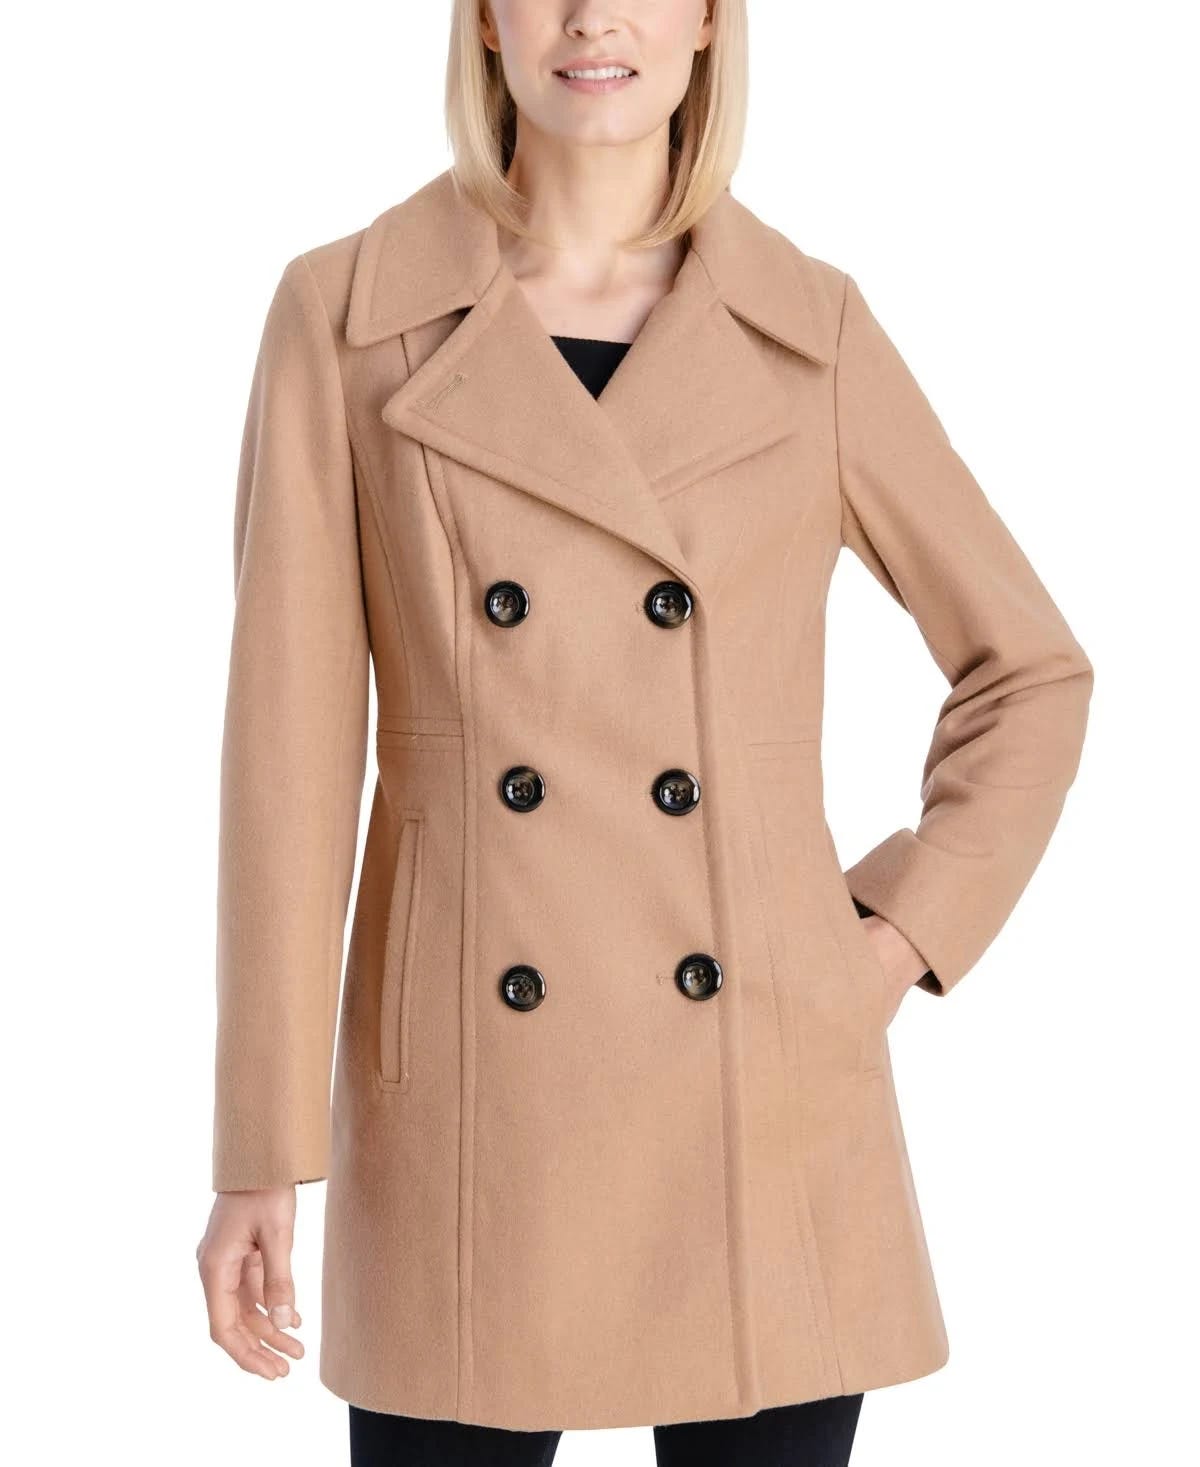 Stylish Double-Breasted Wool & Polyester Peacoat for Women | Image